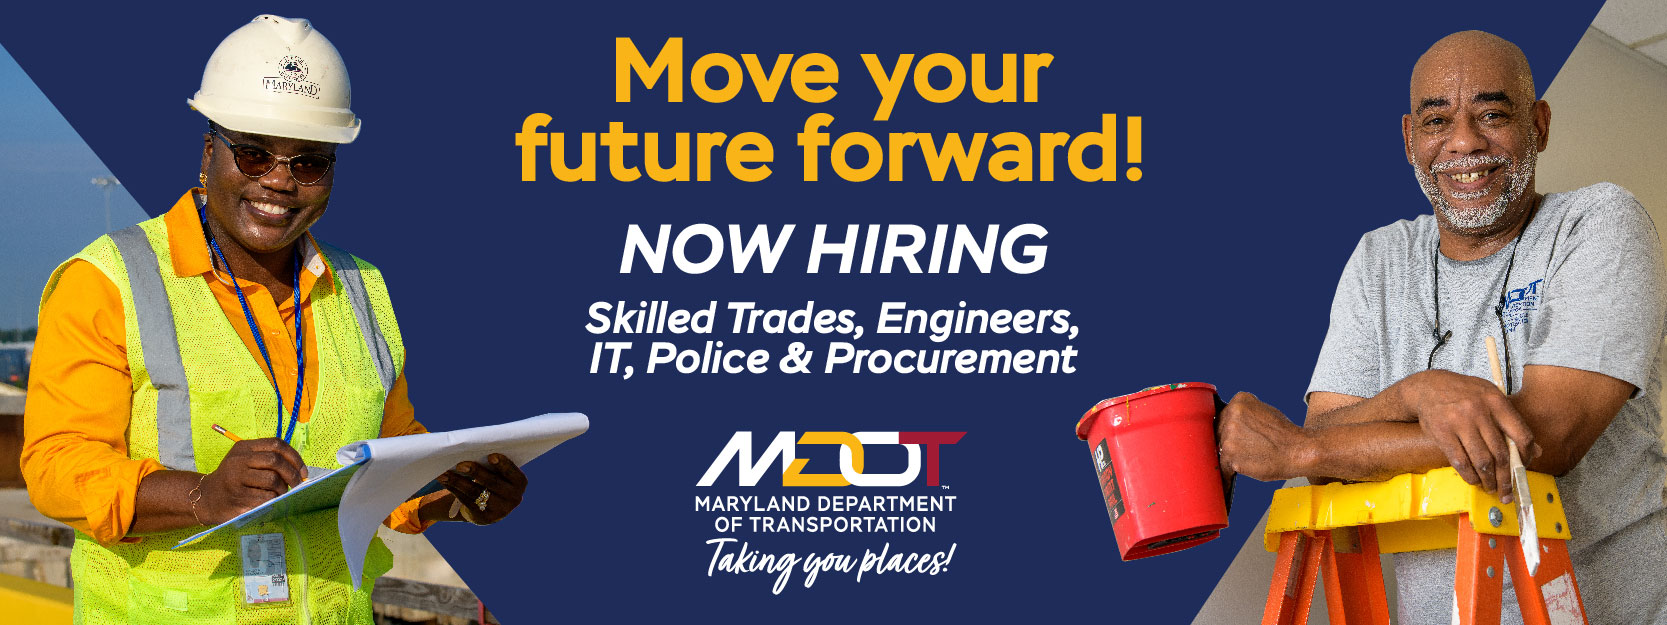 Move Your Future Forward With MDOT